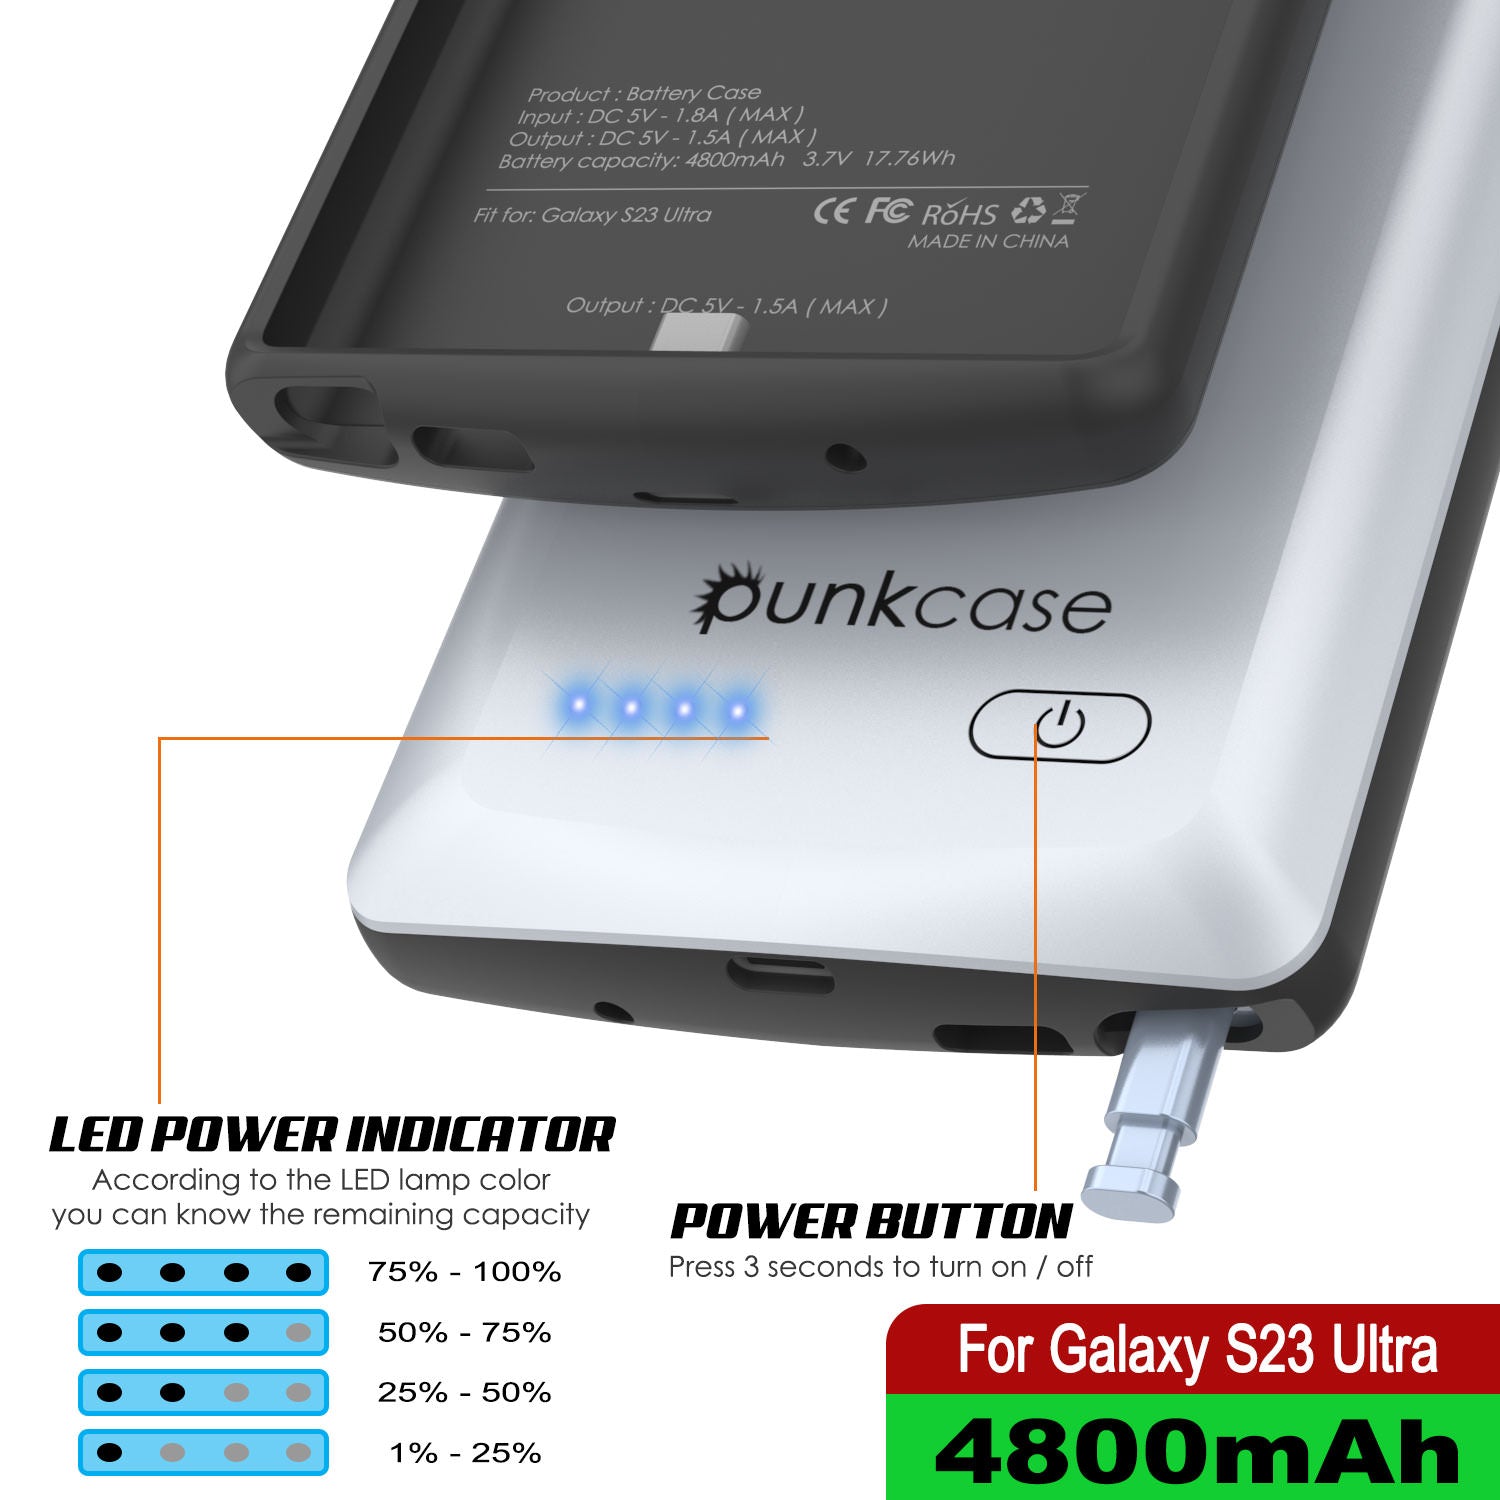 PunkJuice S24 Ultra Battery Case White - Portable Charging Power Juice Bank with 4500mAh